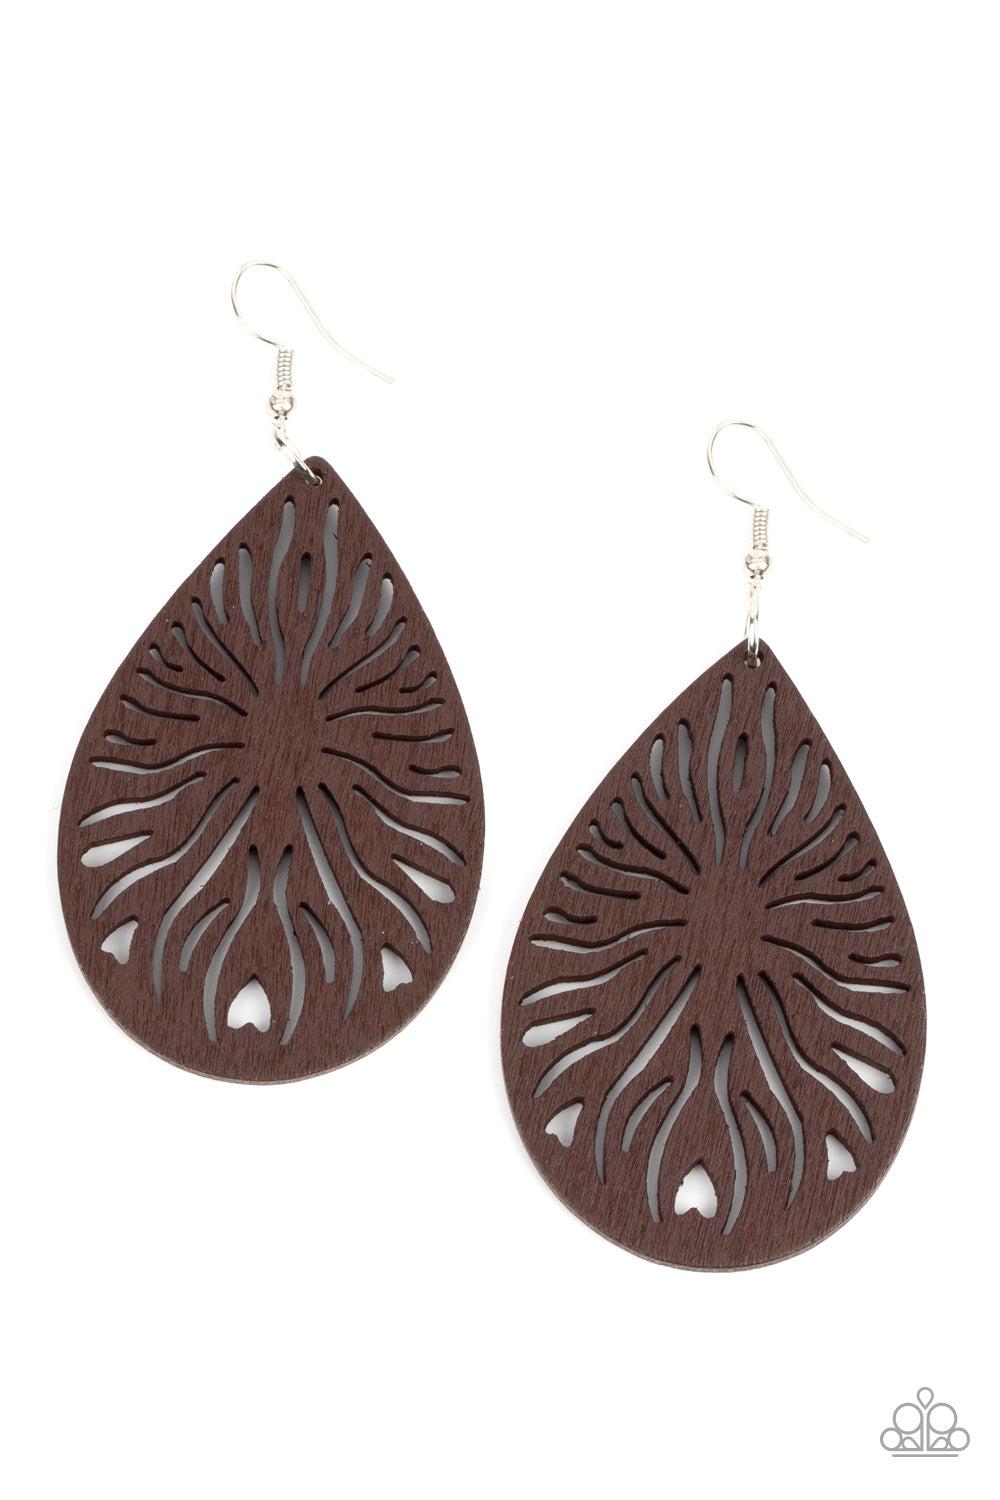 Sunny Incantations Brown Wood Earrings - Paparazzi Accessories- lightbox - CarasShop.com - $5 Jewelry by Cara Jewels